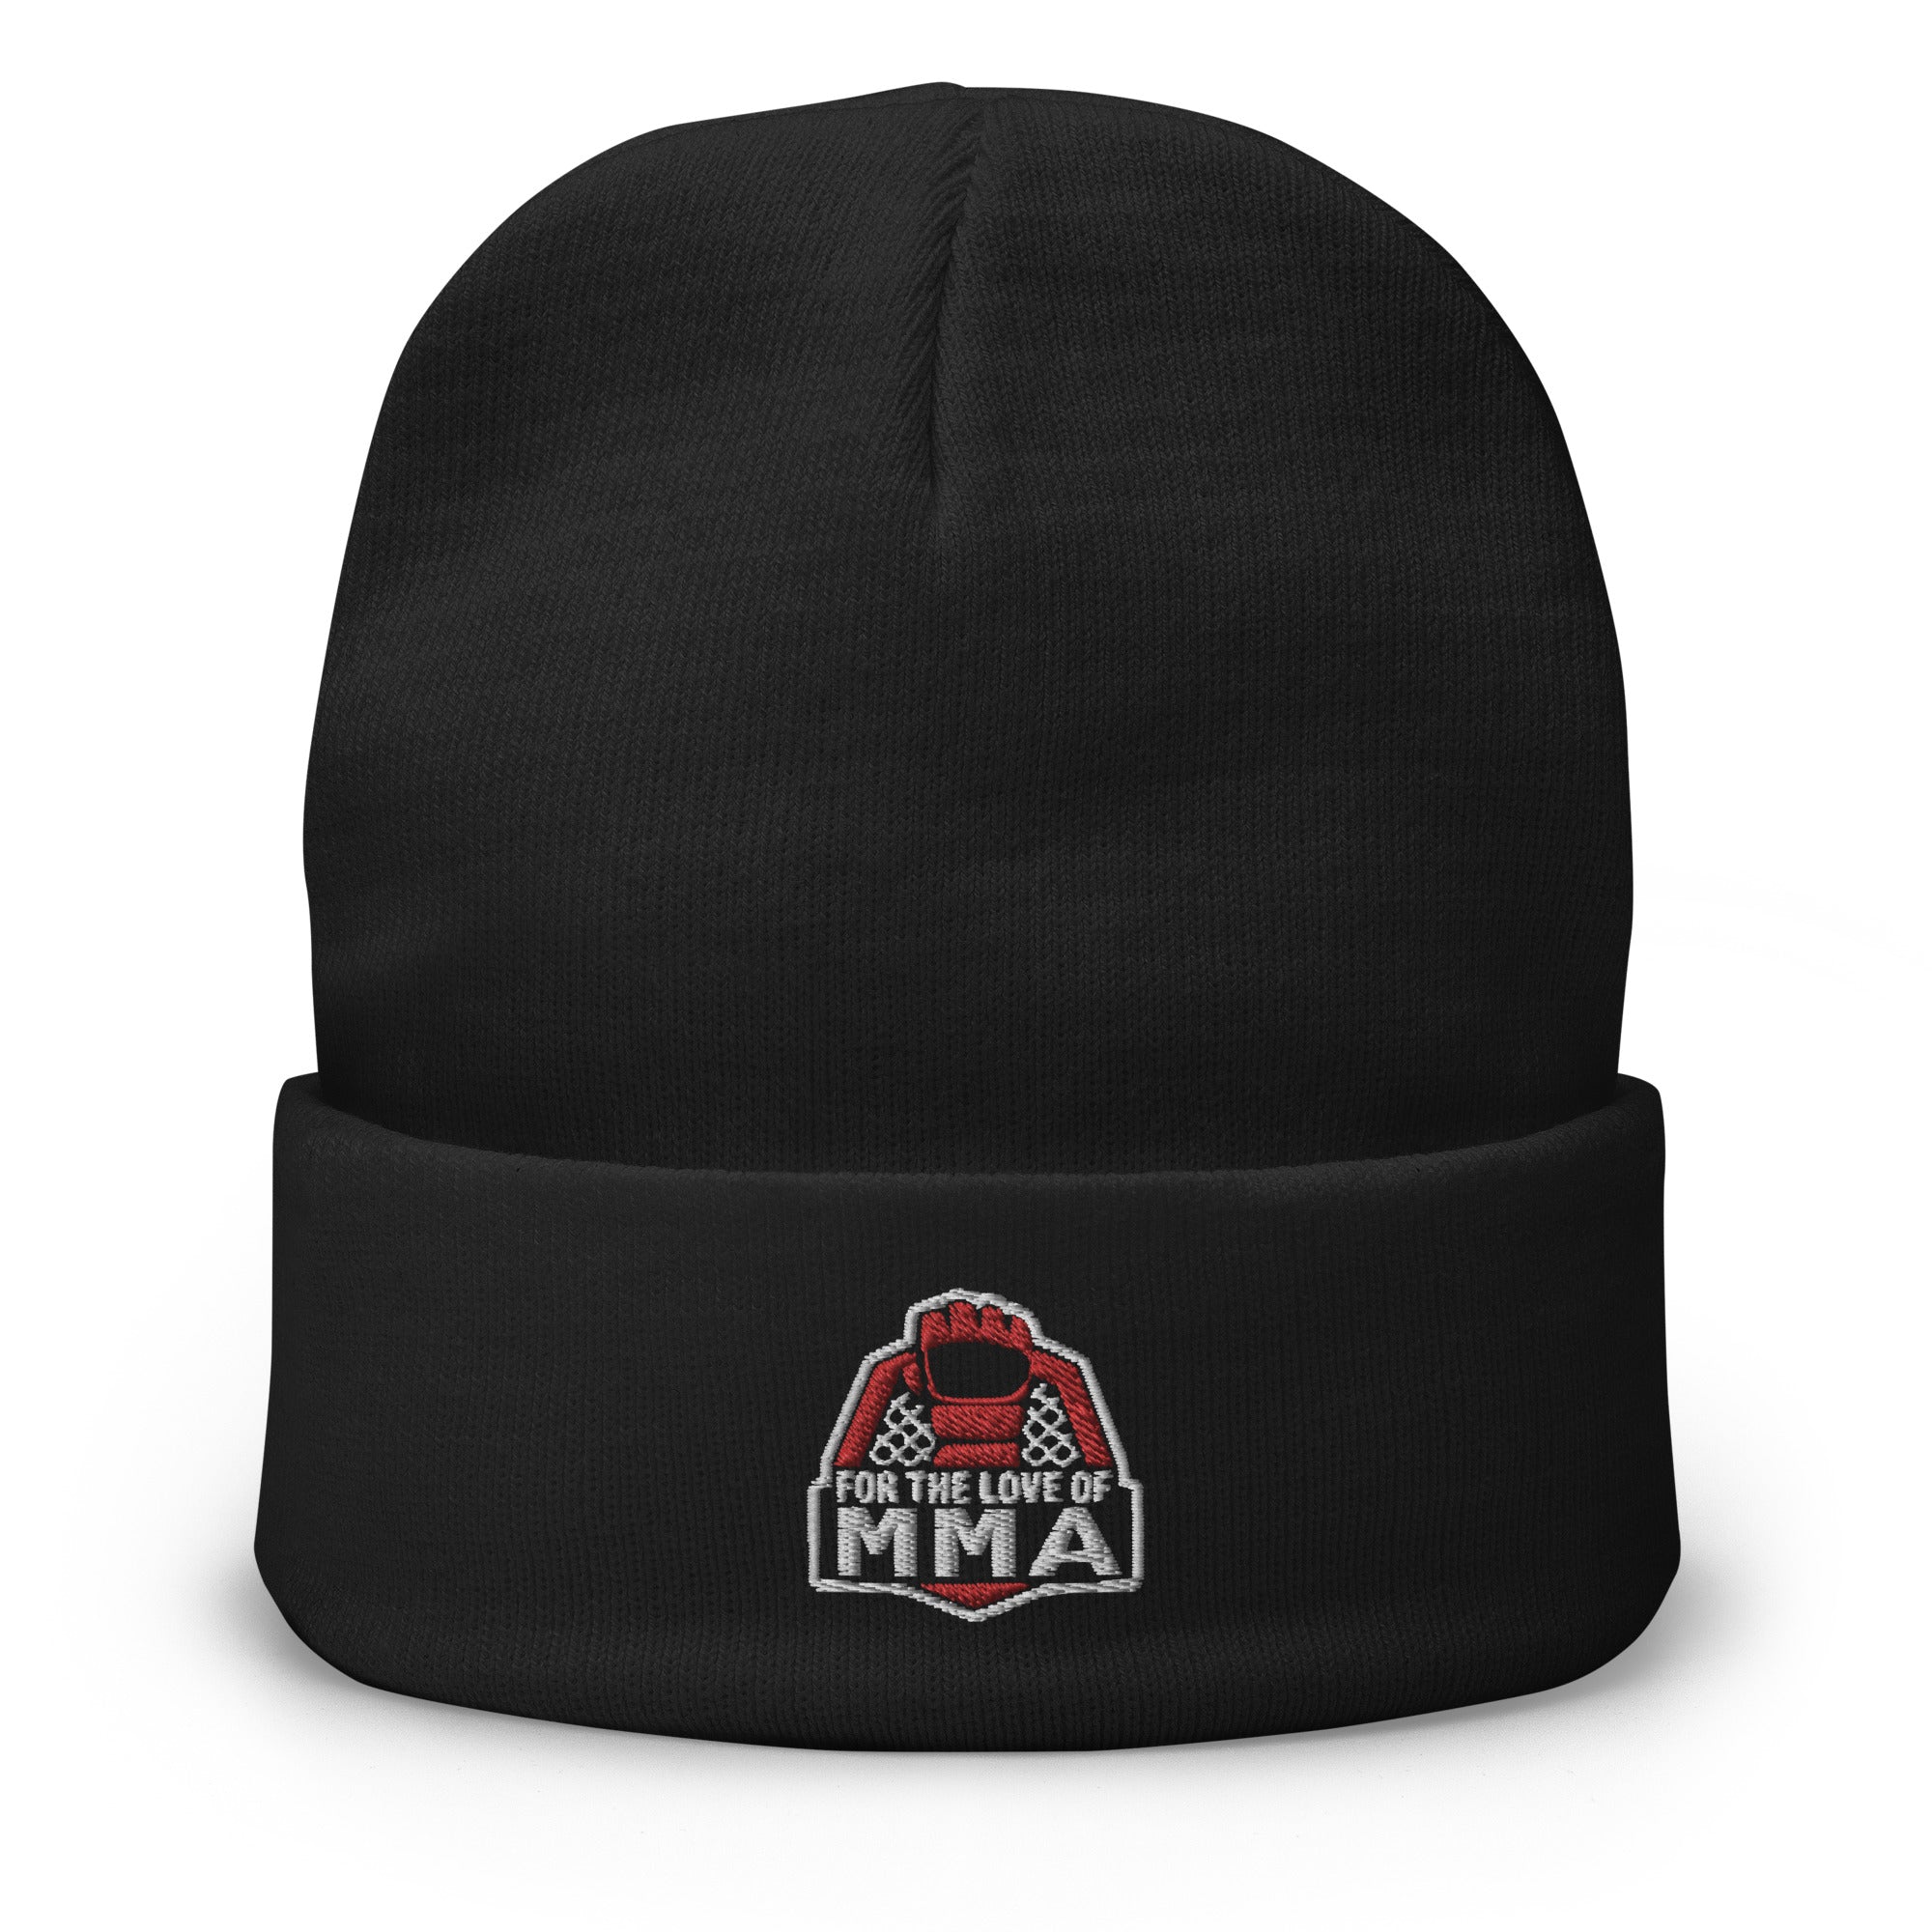 FTL Wrestling Logo Embroidered Beanie - Monopoly Events Store